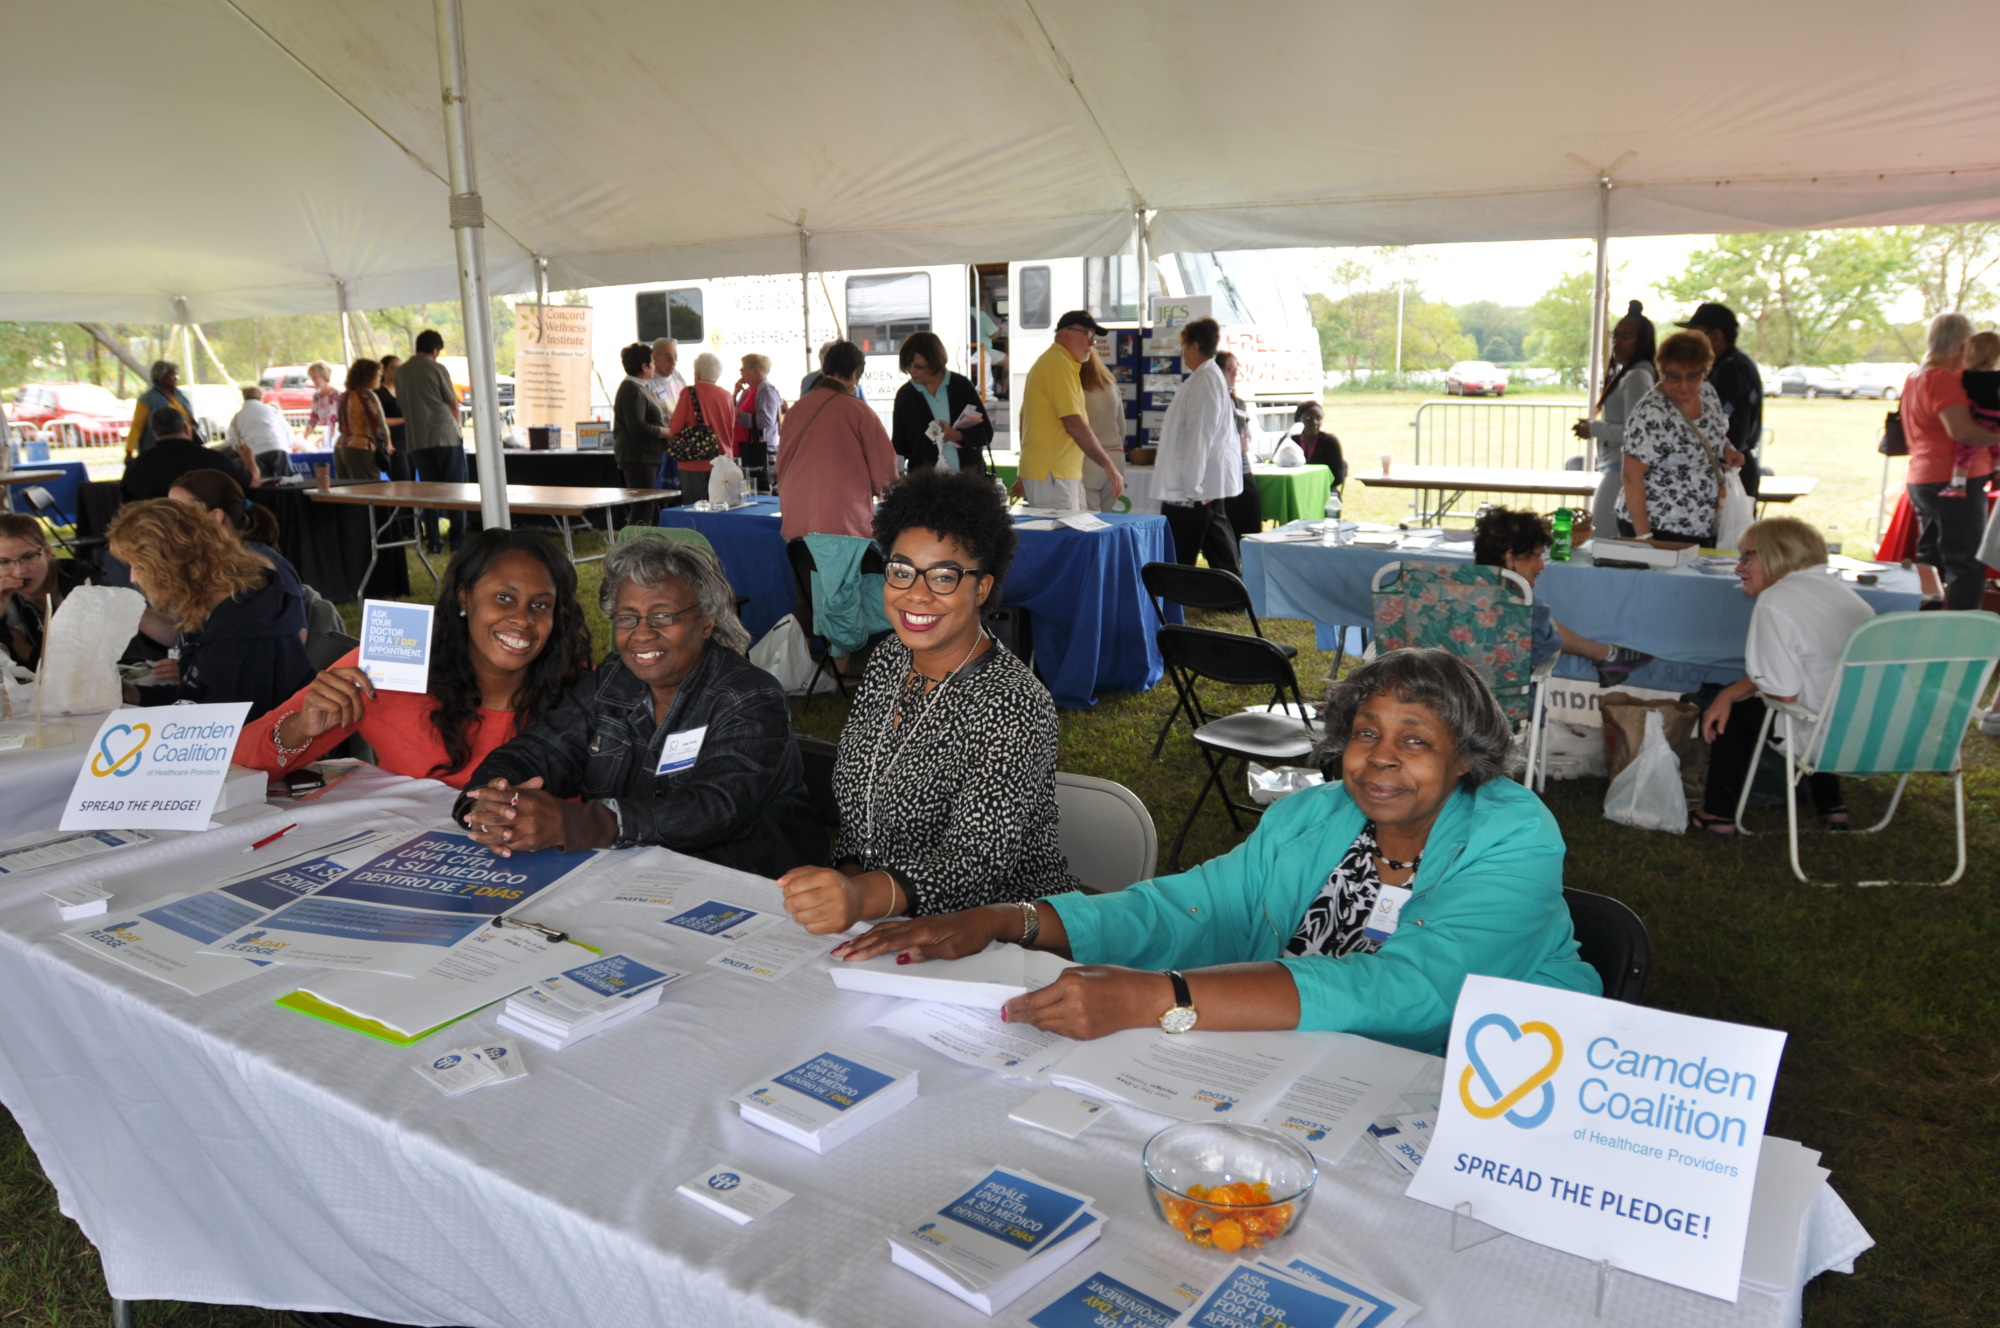 Community Advisory Committee members tabling at a community event